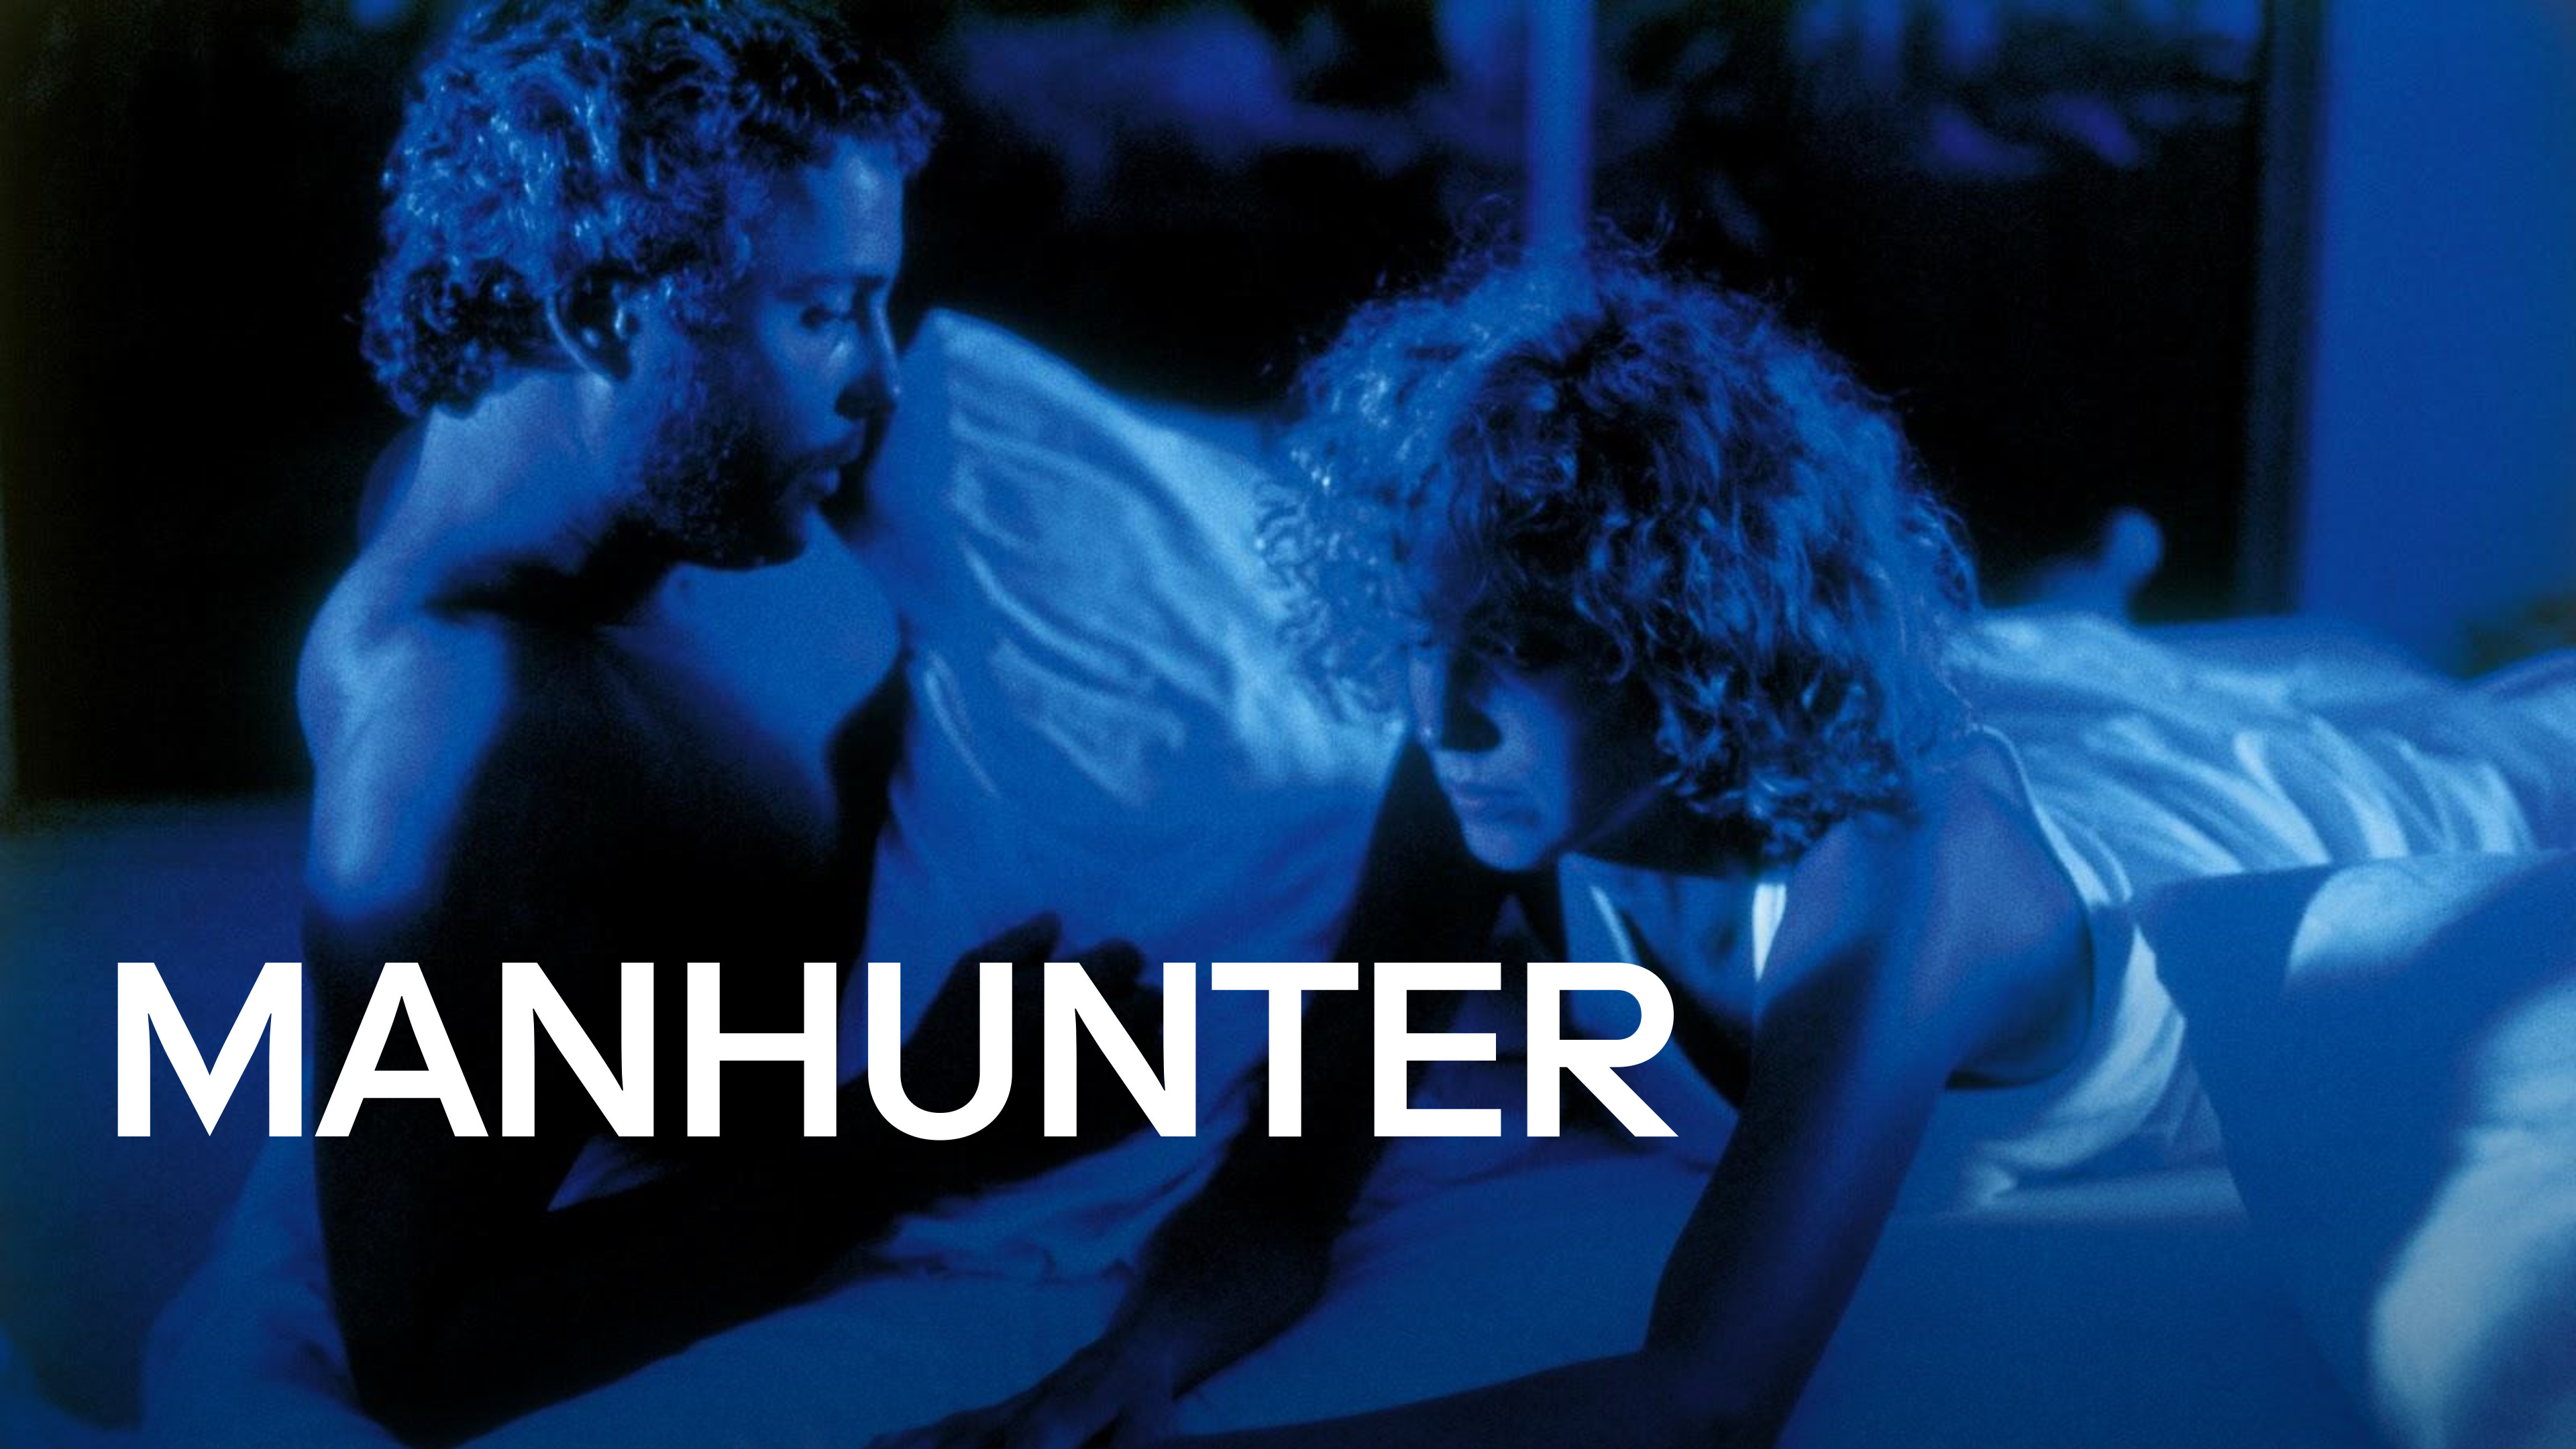 49-facts-about-the-movie-manhunter